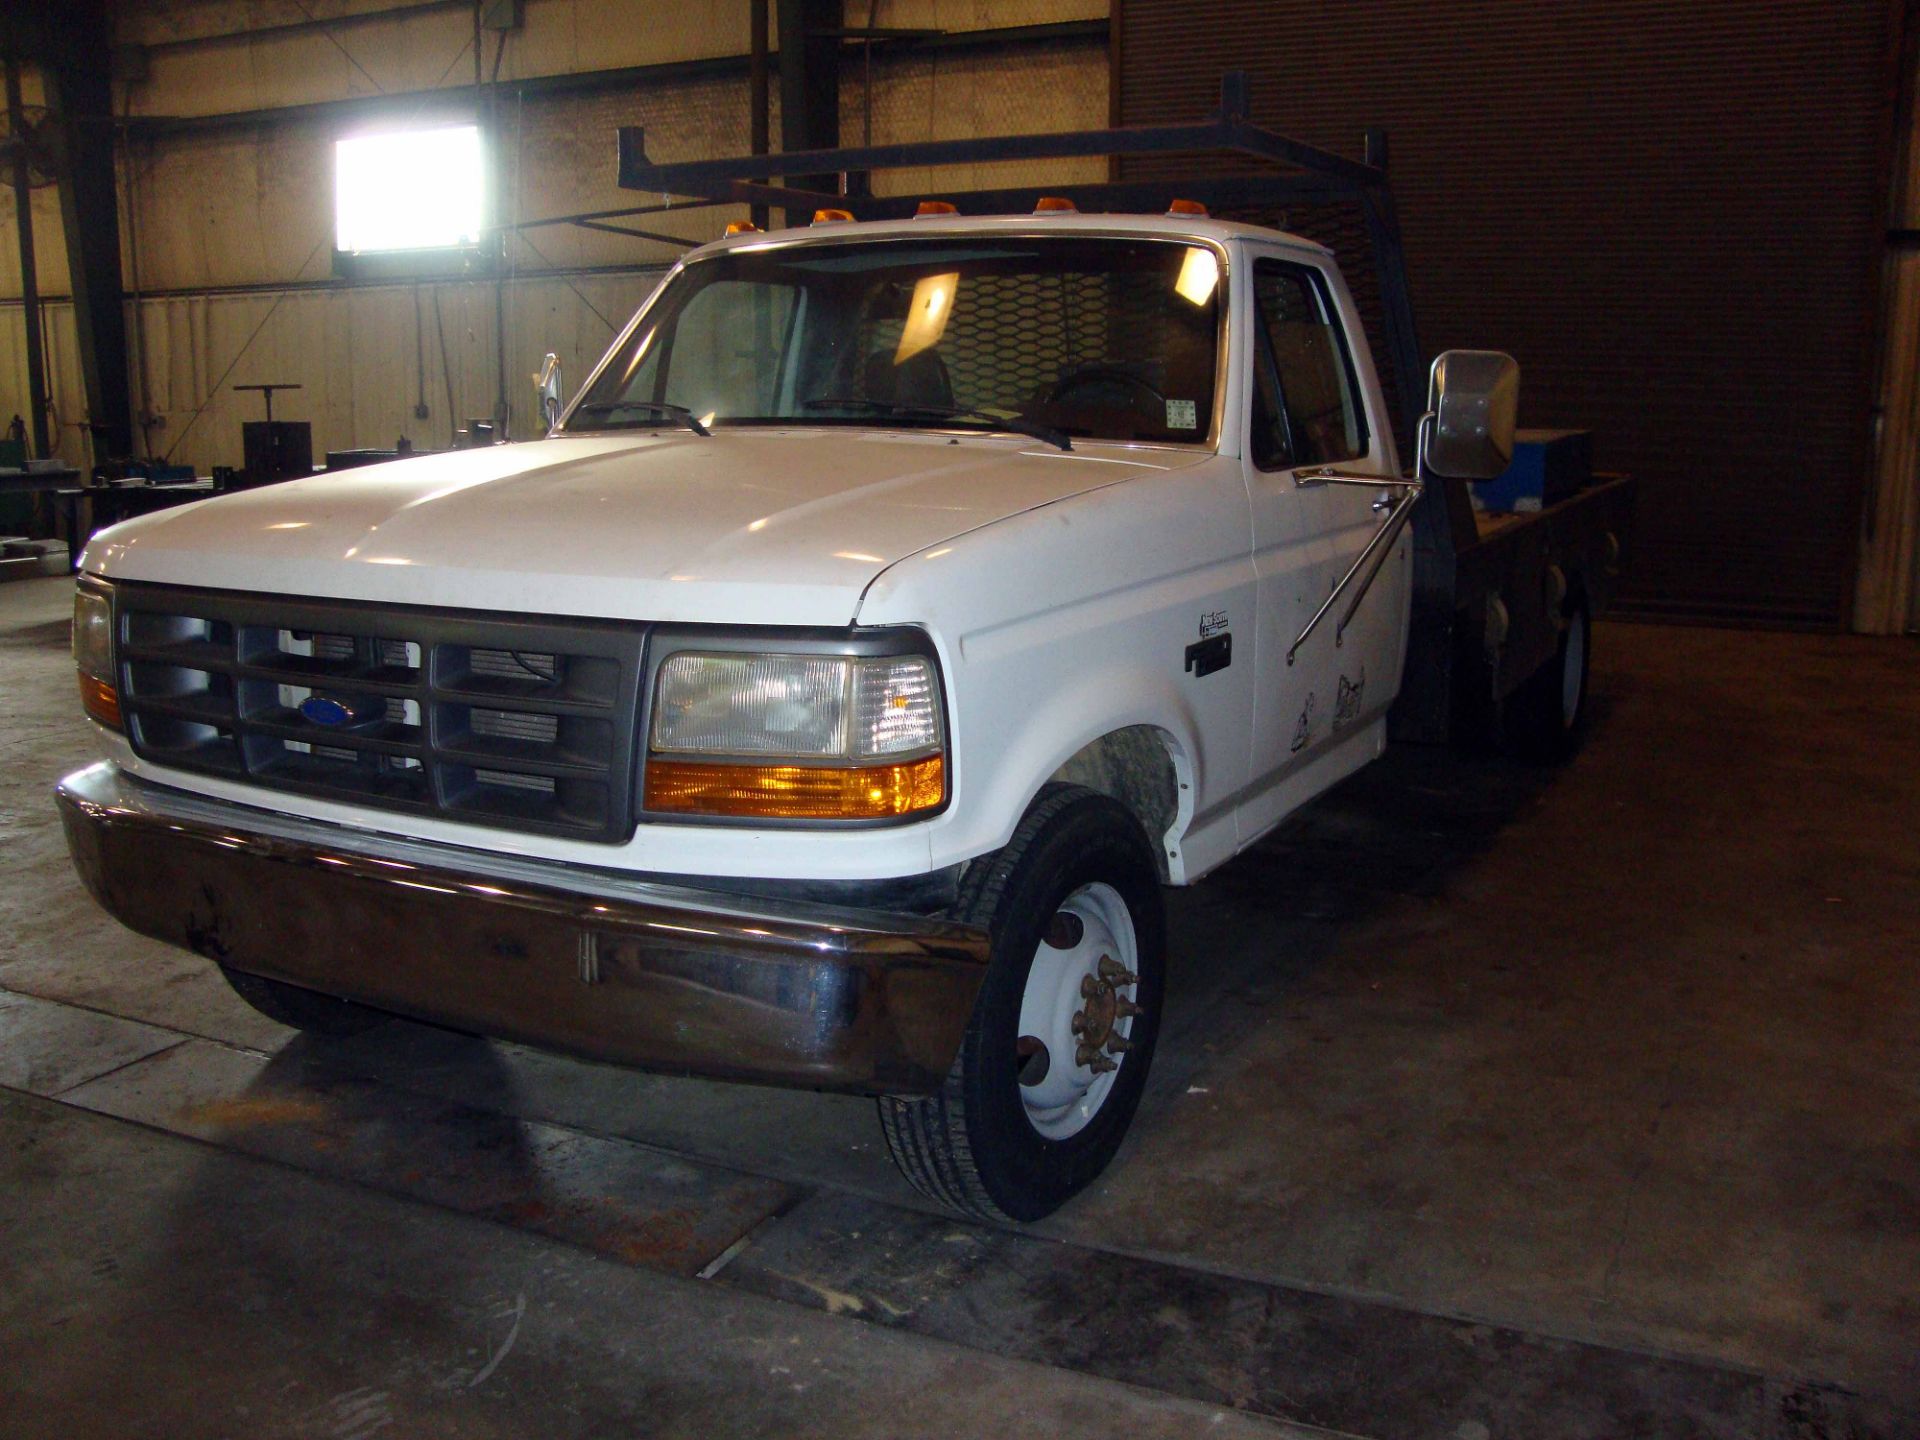 FLATBED TRUCK, 1994 FORD MDL. F350XL, 4-spd. manual trans. w/overdrive, gasoline engine, 84"W. x - Image 2 of 3